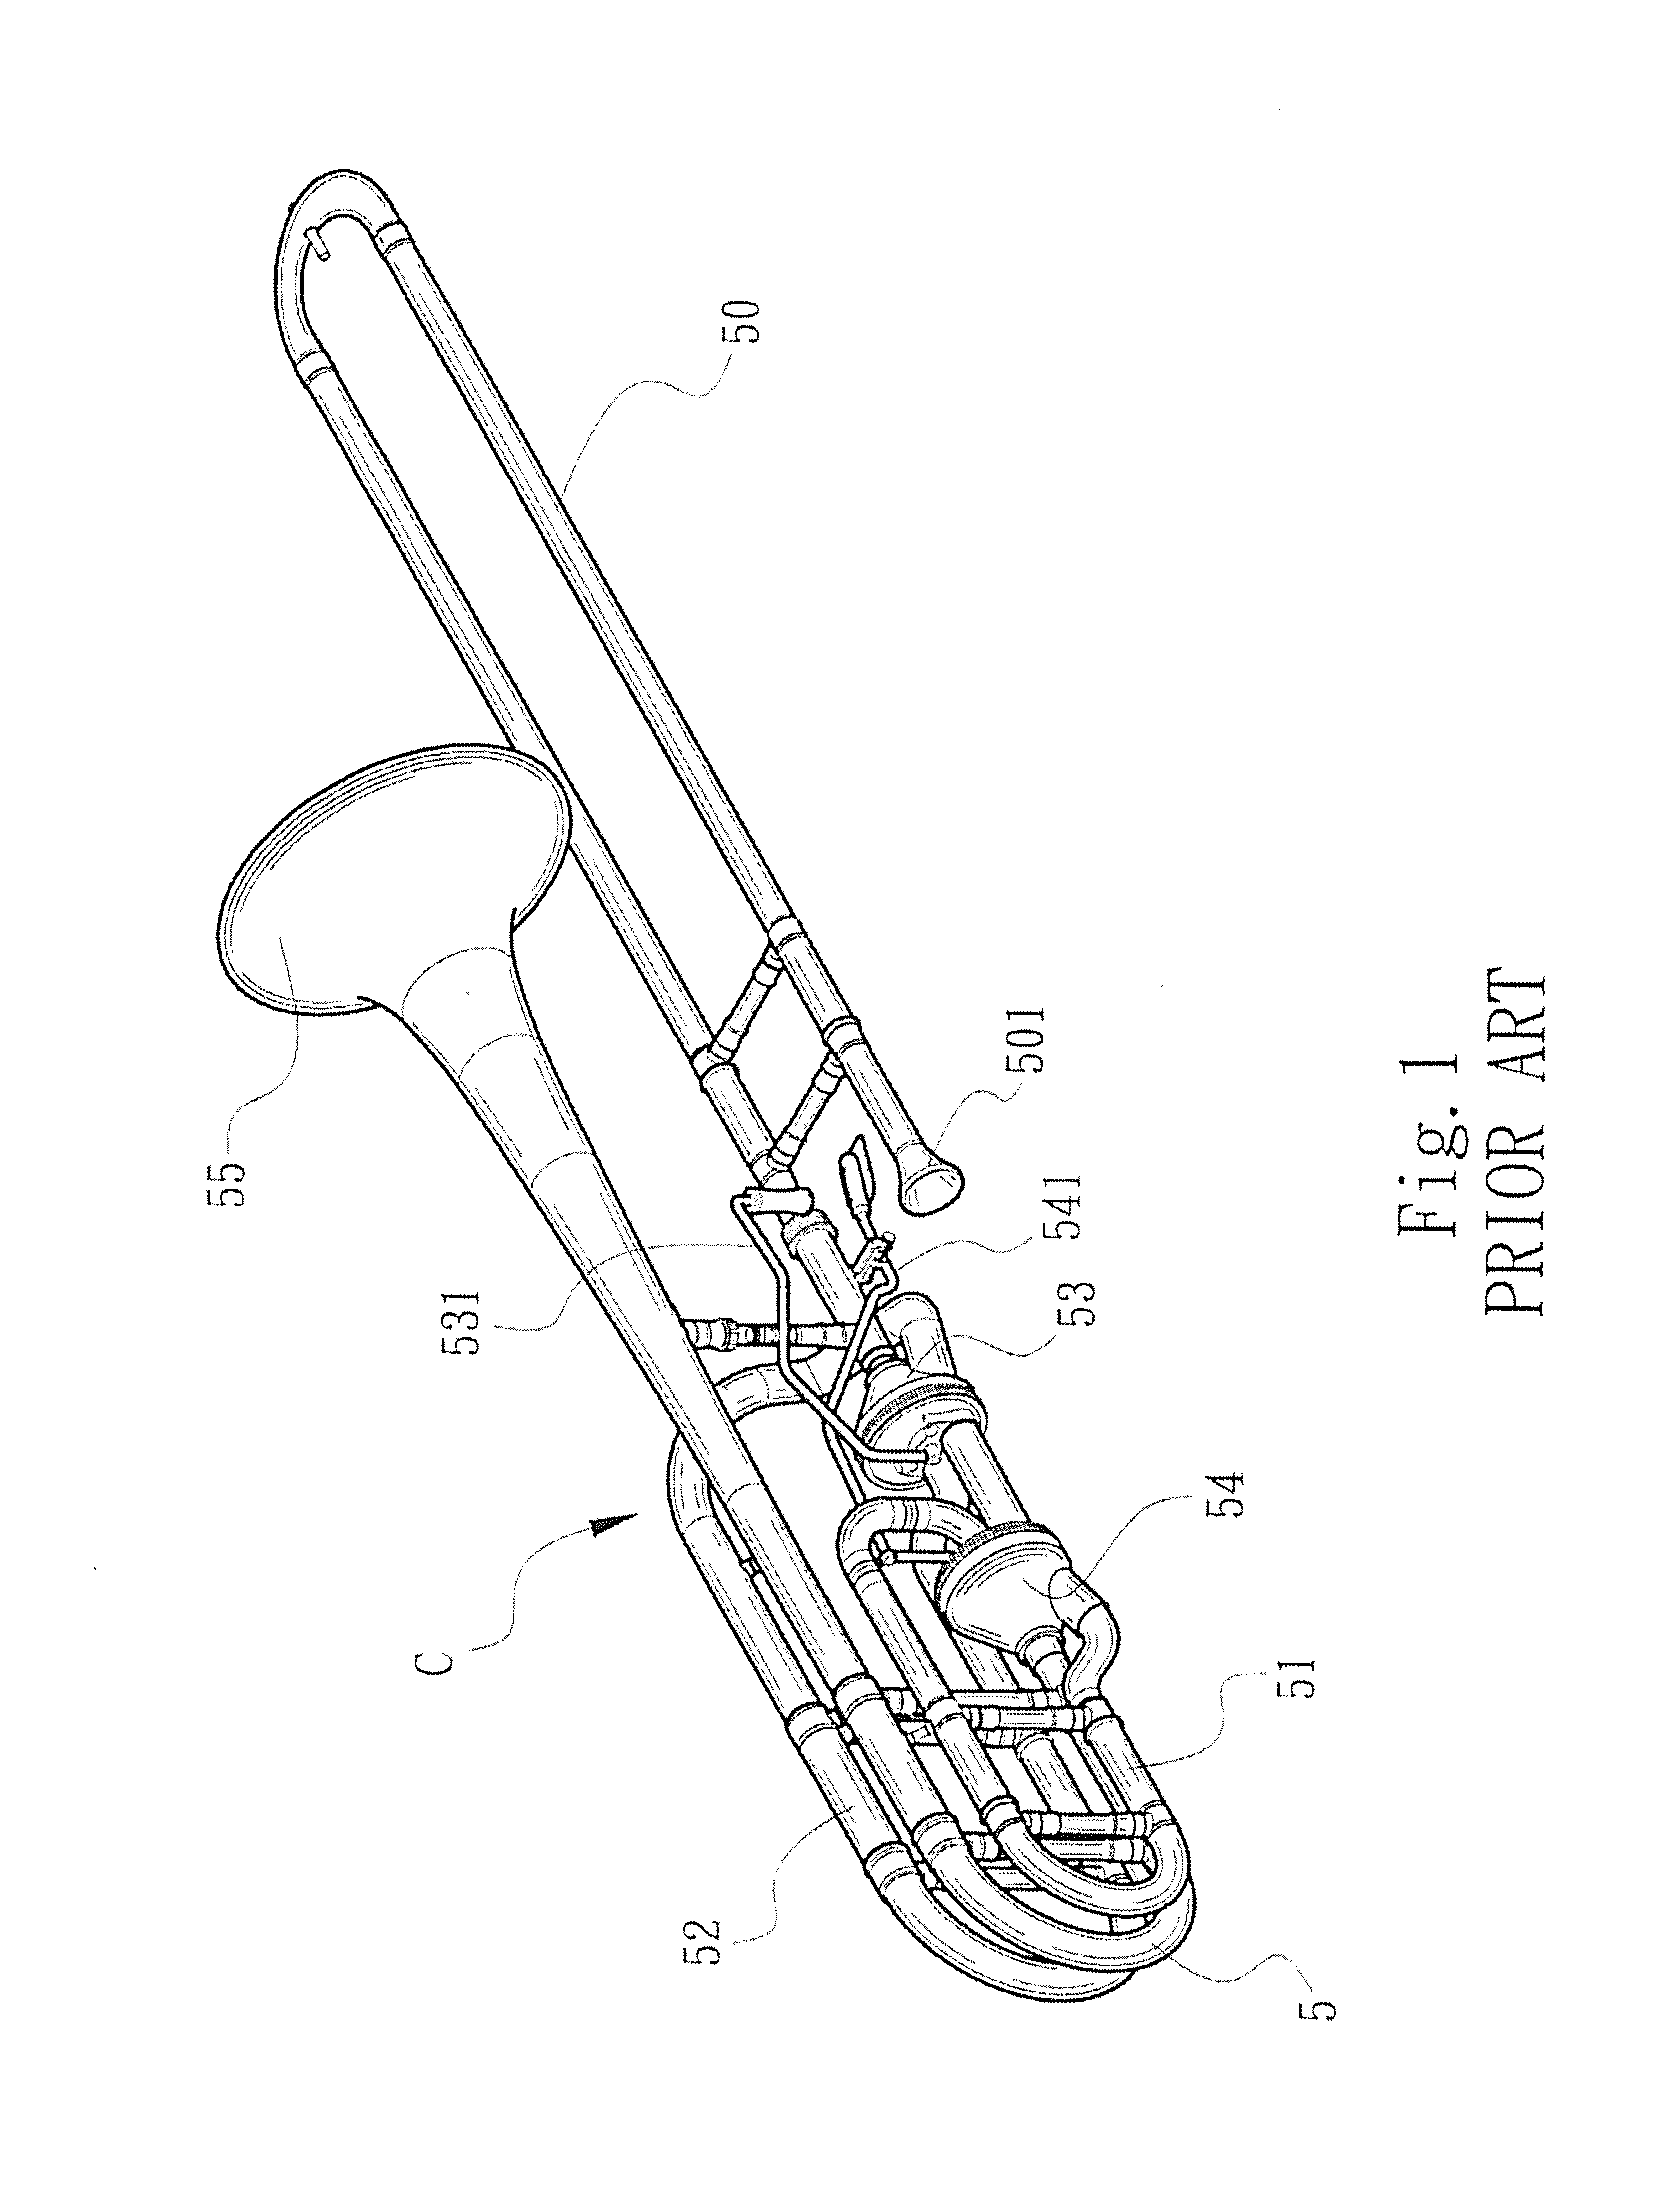 Dual rotor axial-flow rotor valve structure